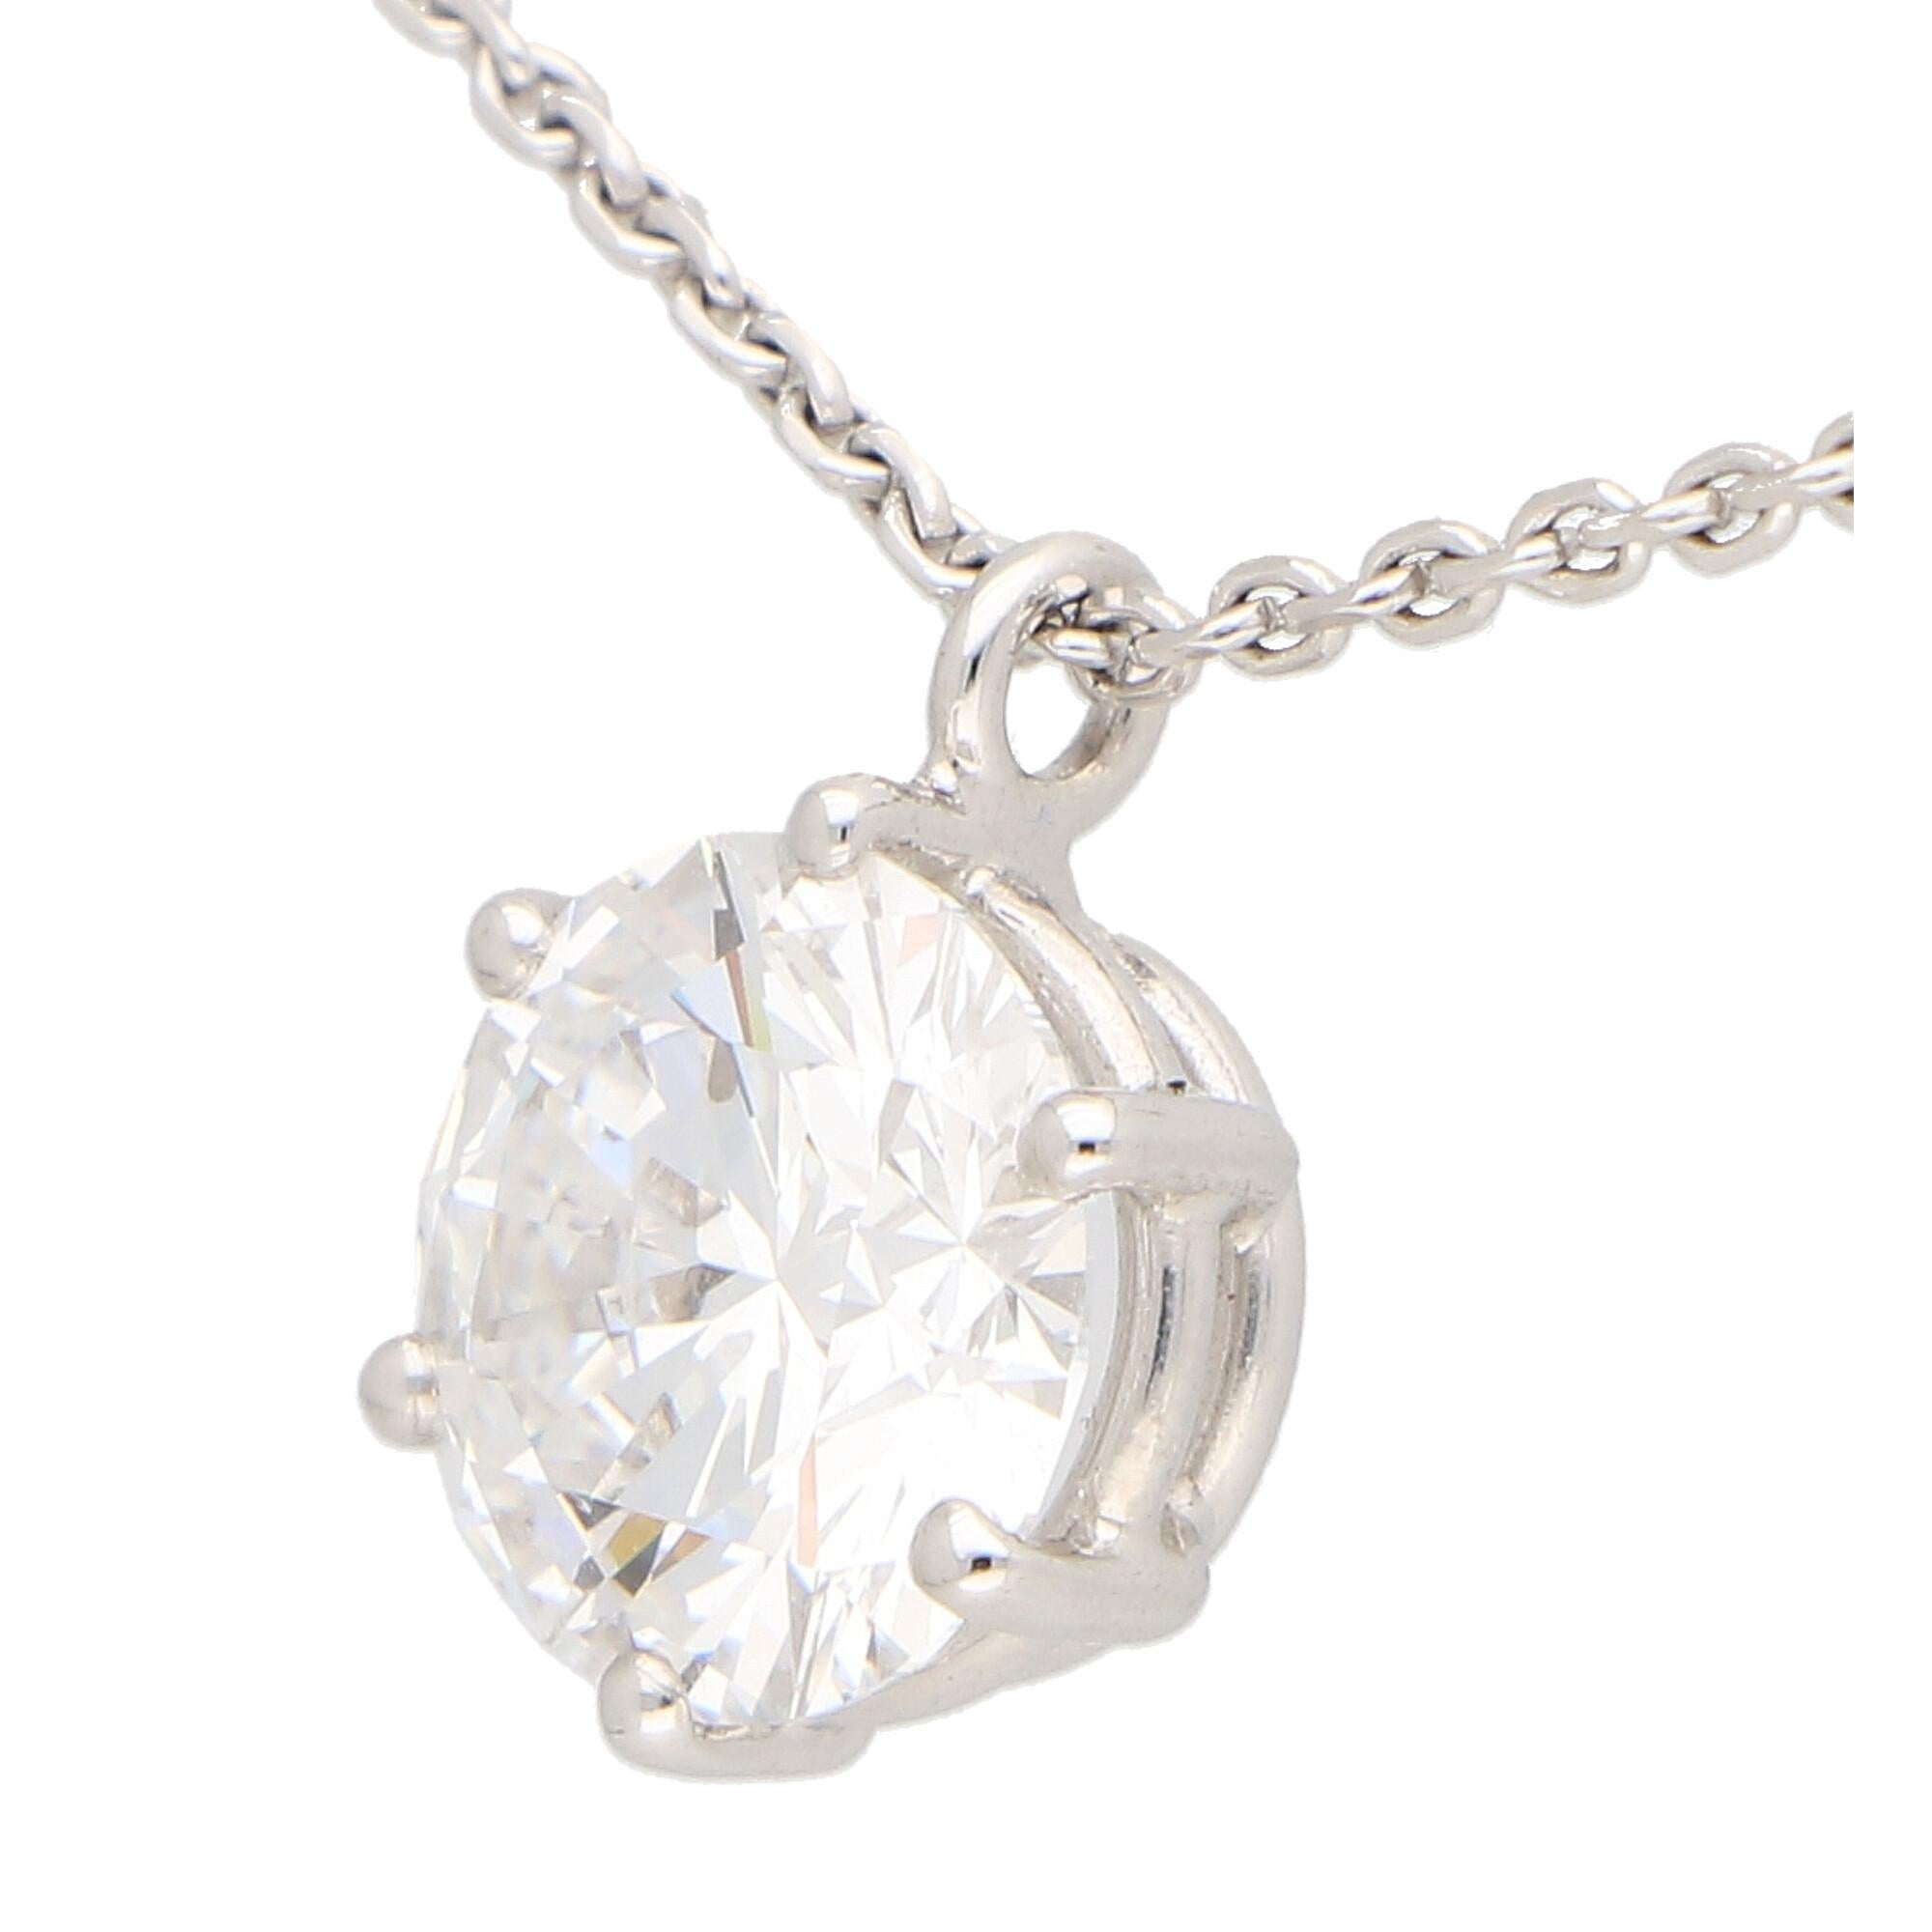 A beautiful GIA certified round brilliant cut single stone diamond pendant set in 18k white gold.

The necklace solely features a spectacular 2.40ct round brilliant cut diamond which is securely set in a six claw open gallery setting. The true